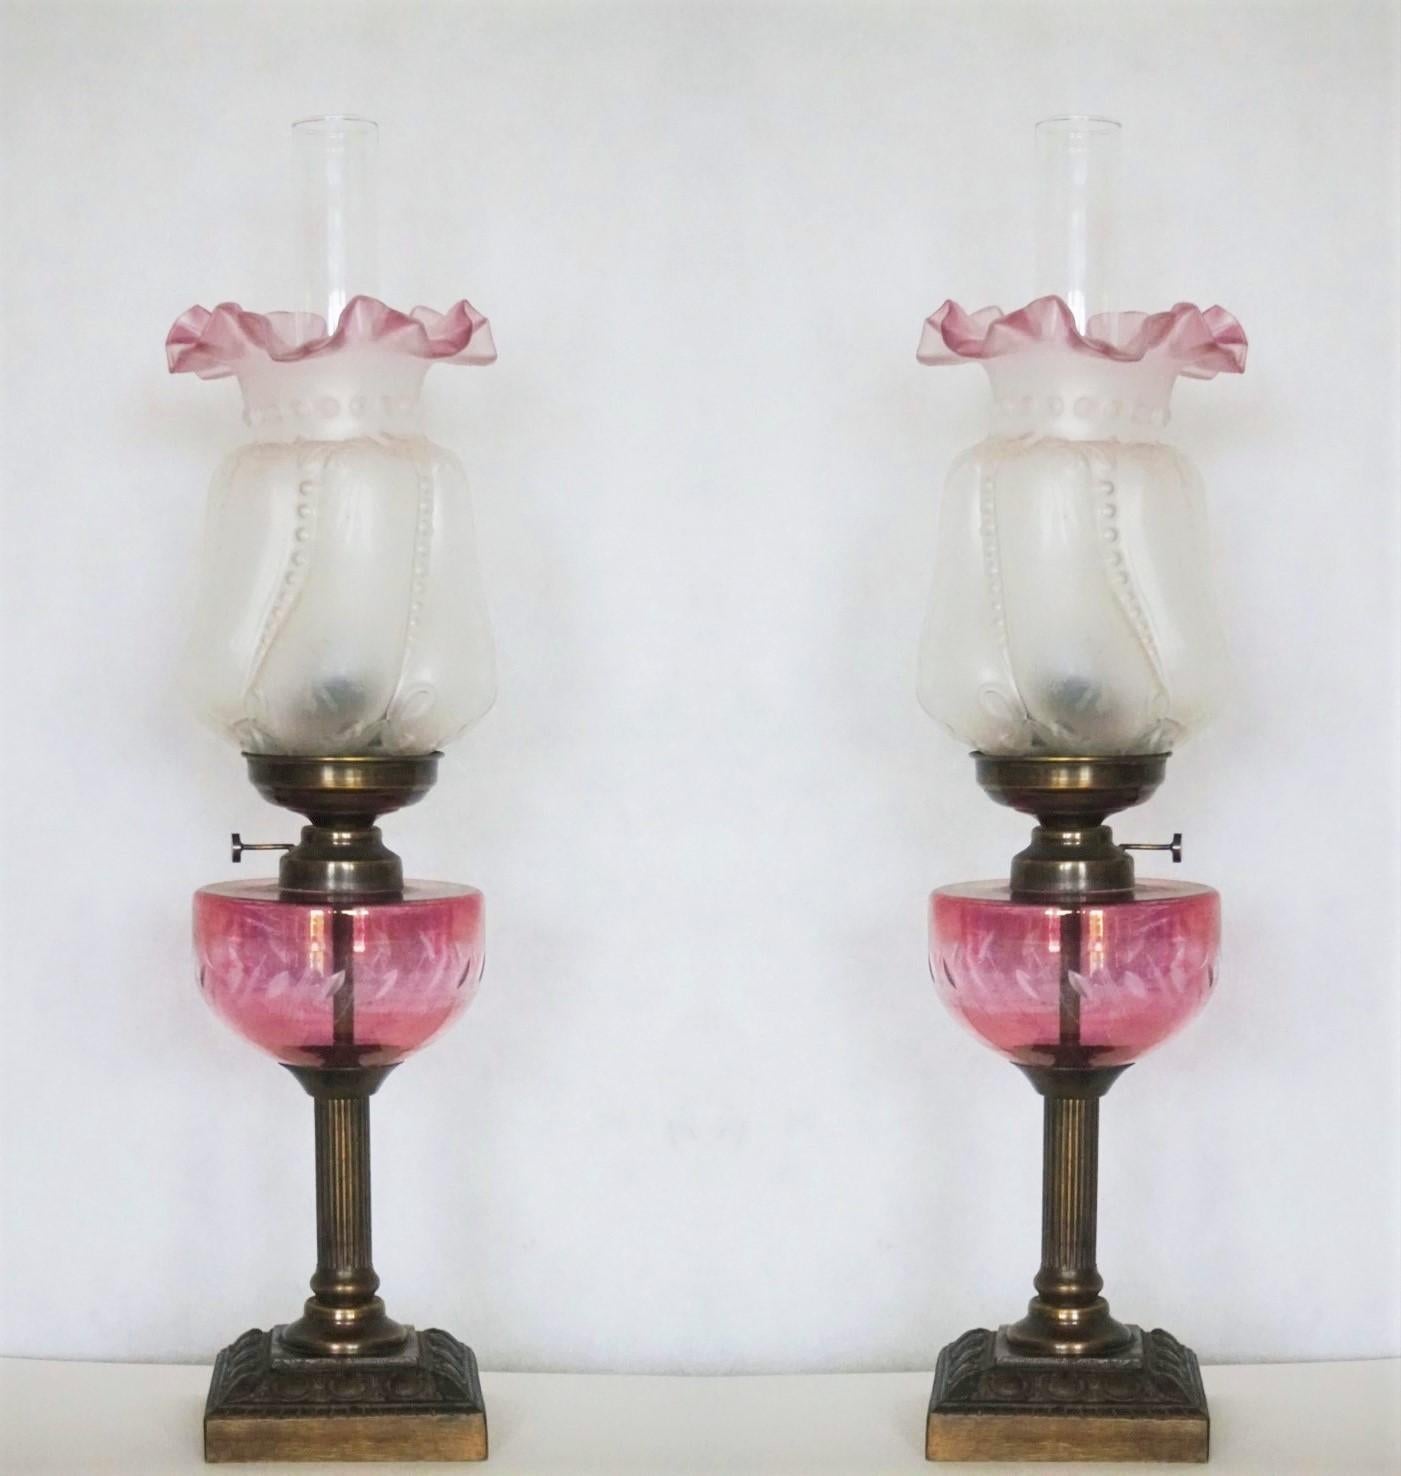 A lovely pair of electrified cranberry colored cut-glass font oil lamps raised on a patinated bronze fluted column, all on a solid bronze square base, France, circa 1910-1920. With beautiful etched art glass shades and clear glass hurricane